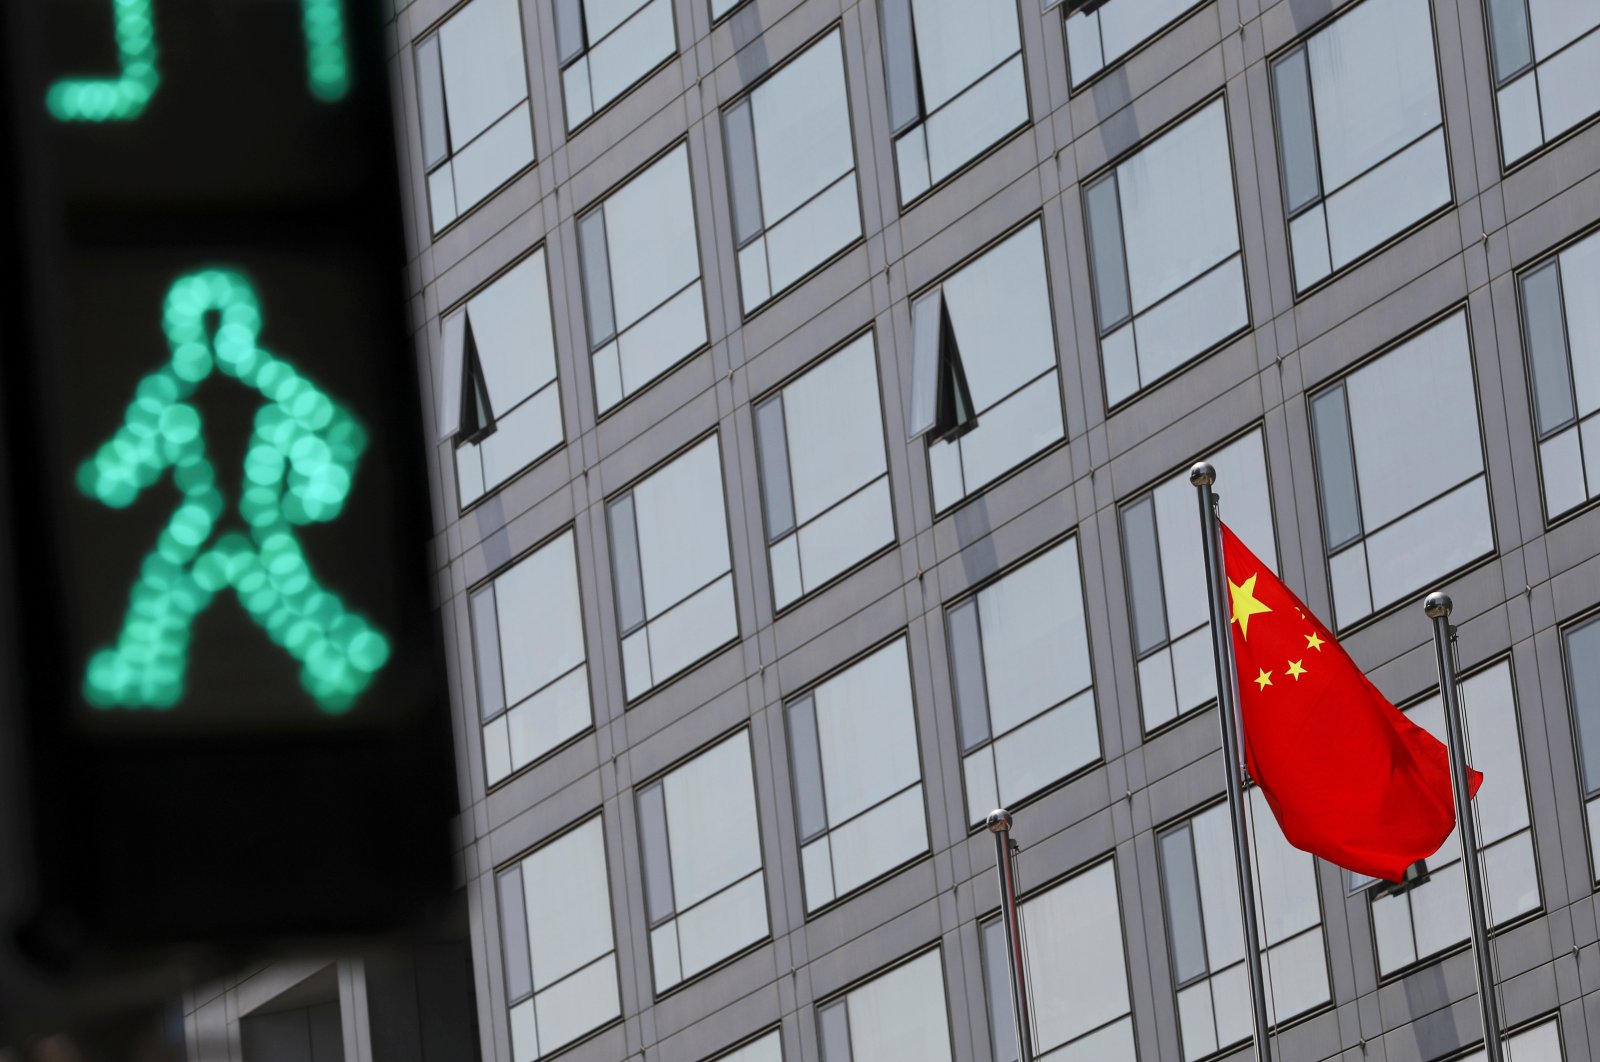 A Chinese national flag flutters outside the China Securities Regulatory Commission (CSRC) building on the Financial Street in Beijing, China, July 9, 2021. (Reuters Photo)